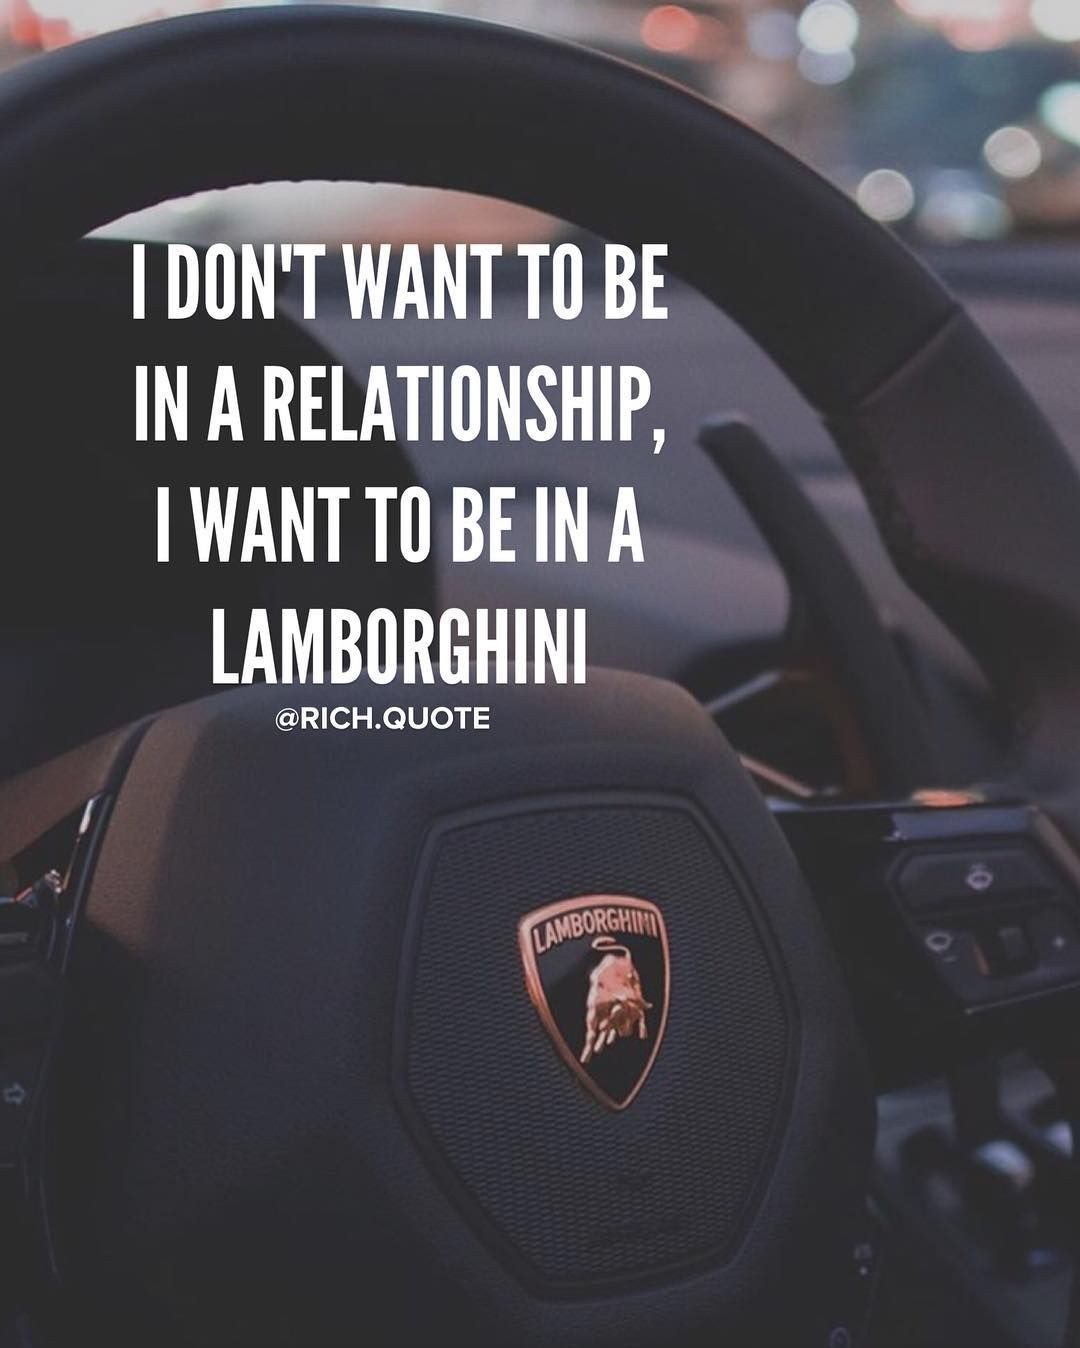 Luxury Cars With Motivational Quotes Images
 I don t want to be in a relationship I want to be in a